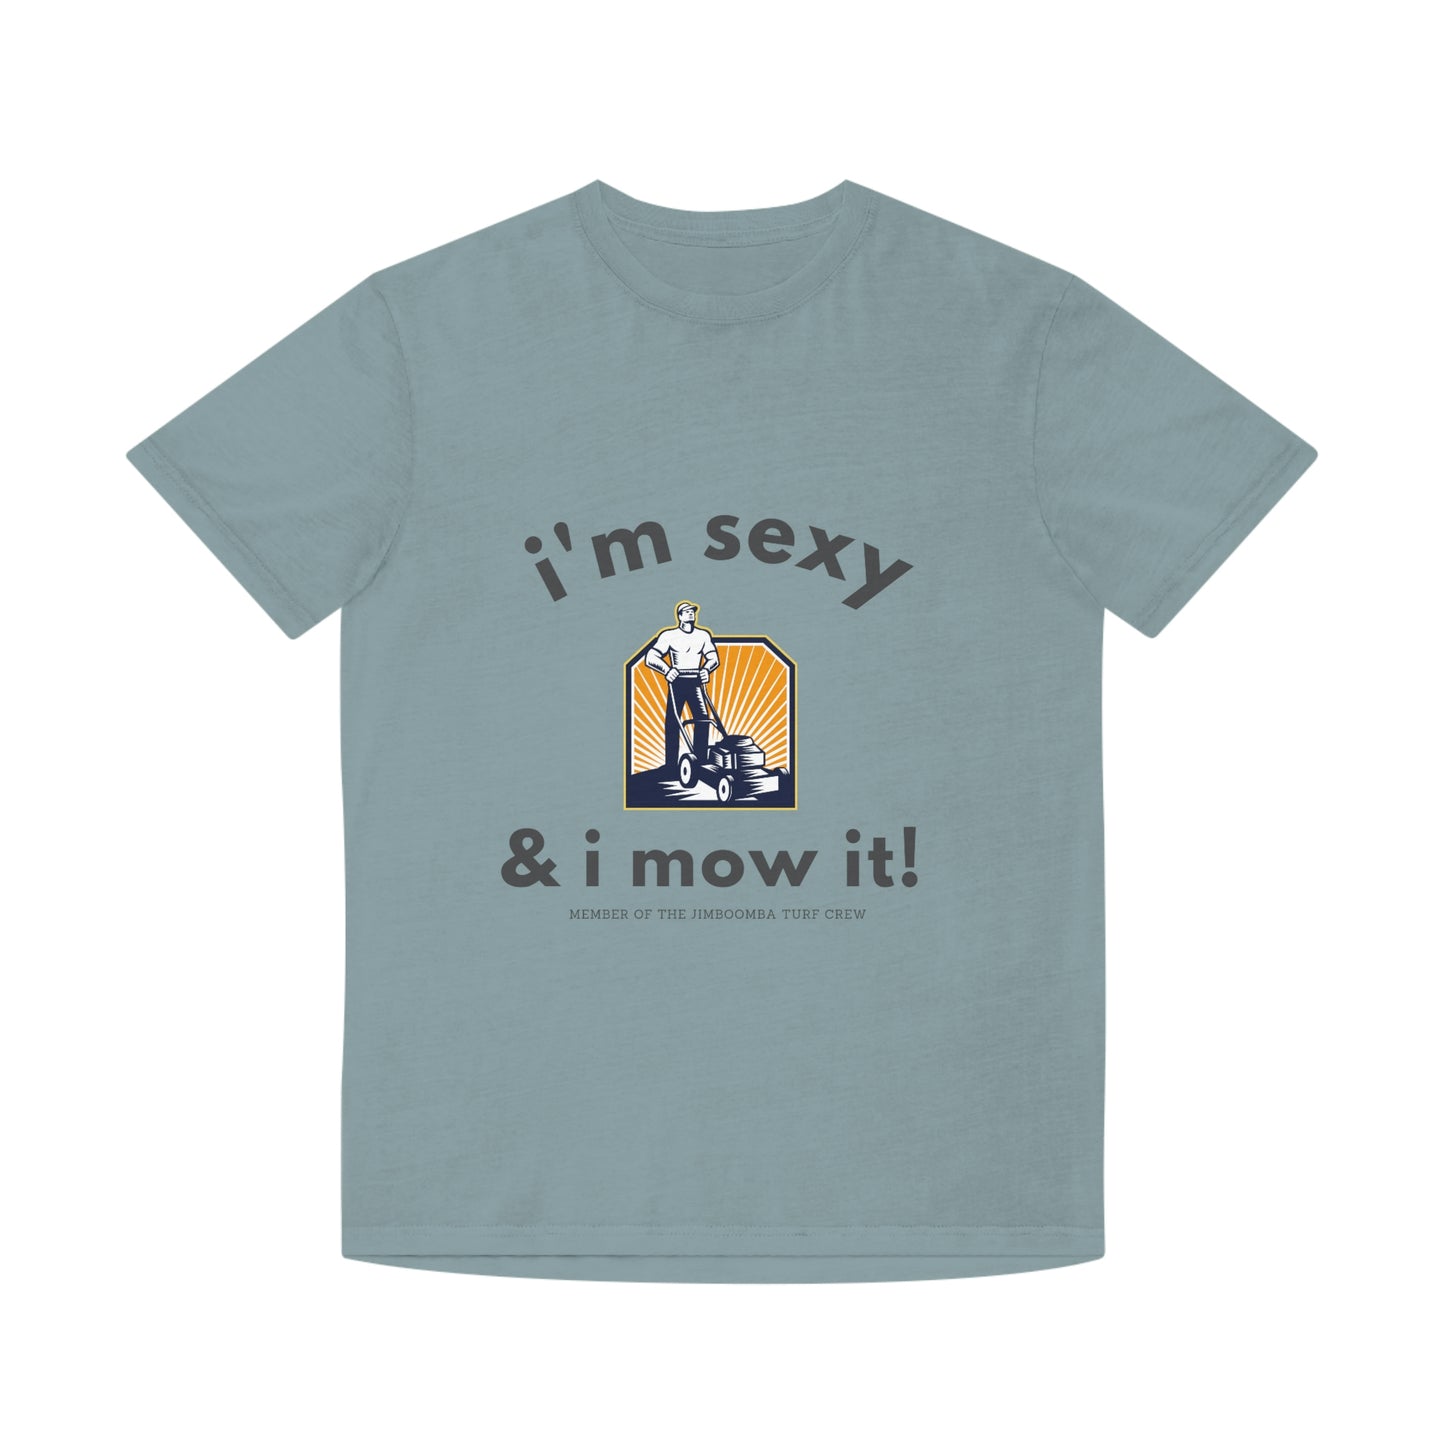 Unisex Faded Shirt - Sexy & I mow it (Male)